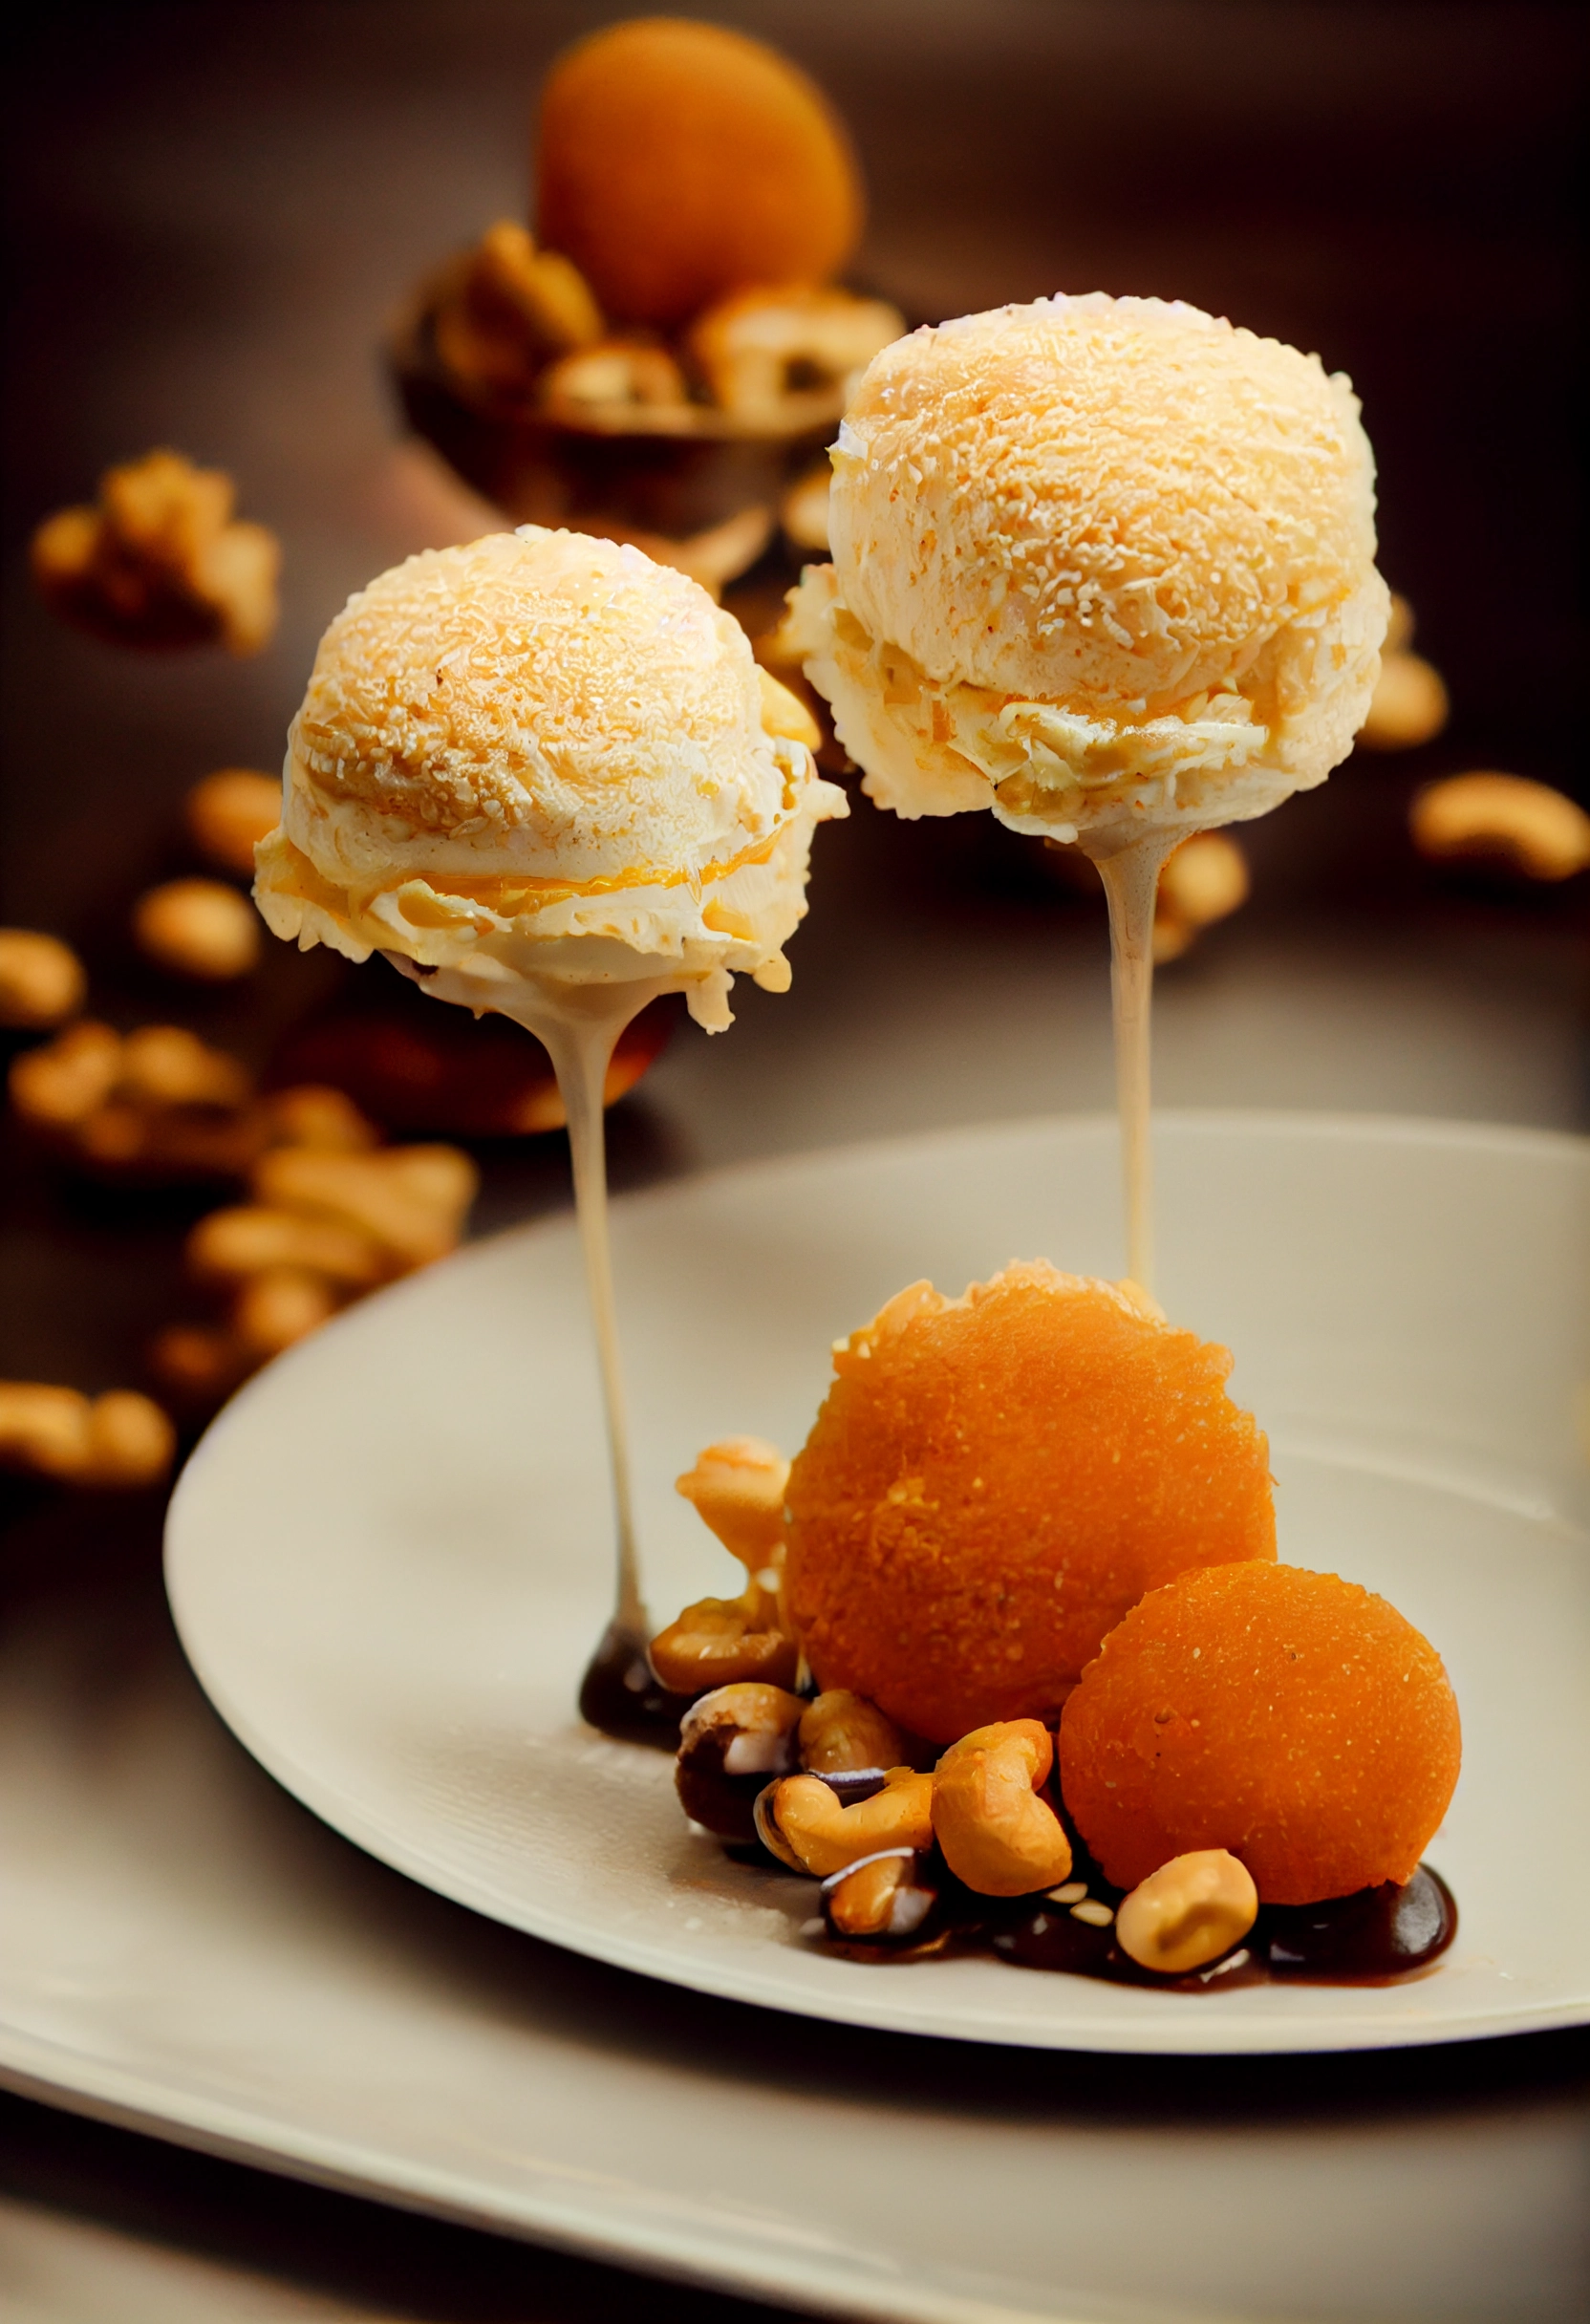 https://theaicuisine.com/wp-content/uploads/2022/11/Damien_fried_ice_cream_with_peanuts_fine_dining_dish_536bbbaa-01e0-4a53-b65b-82f1a97efd48.webp